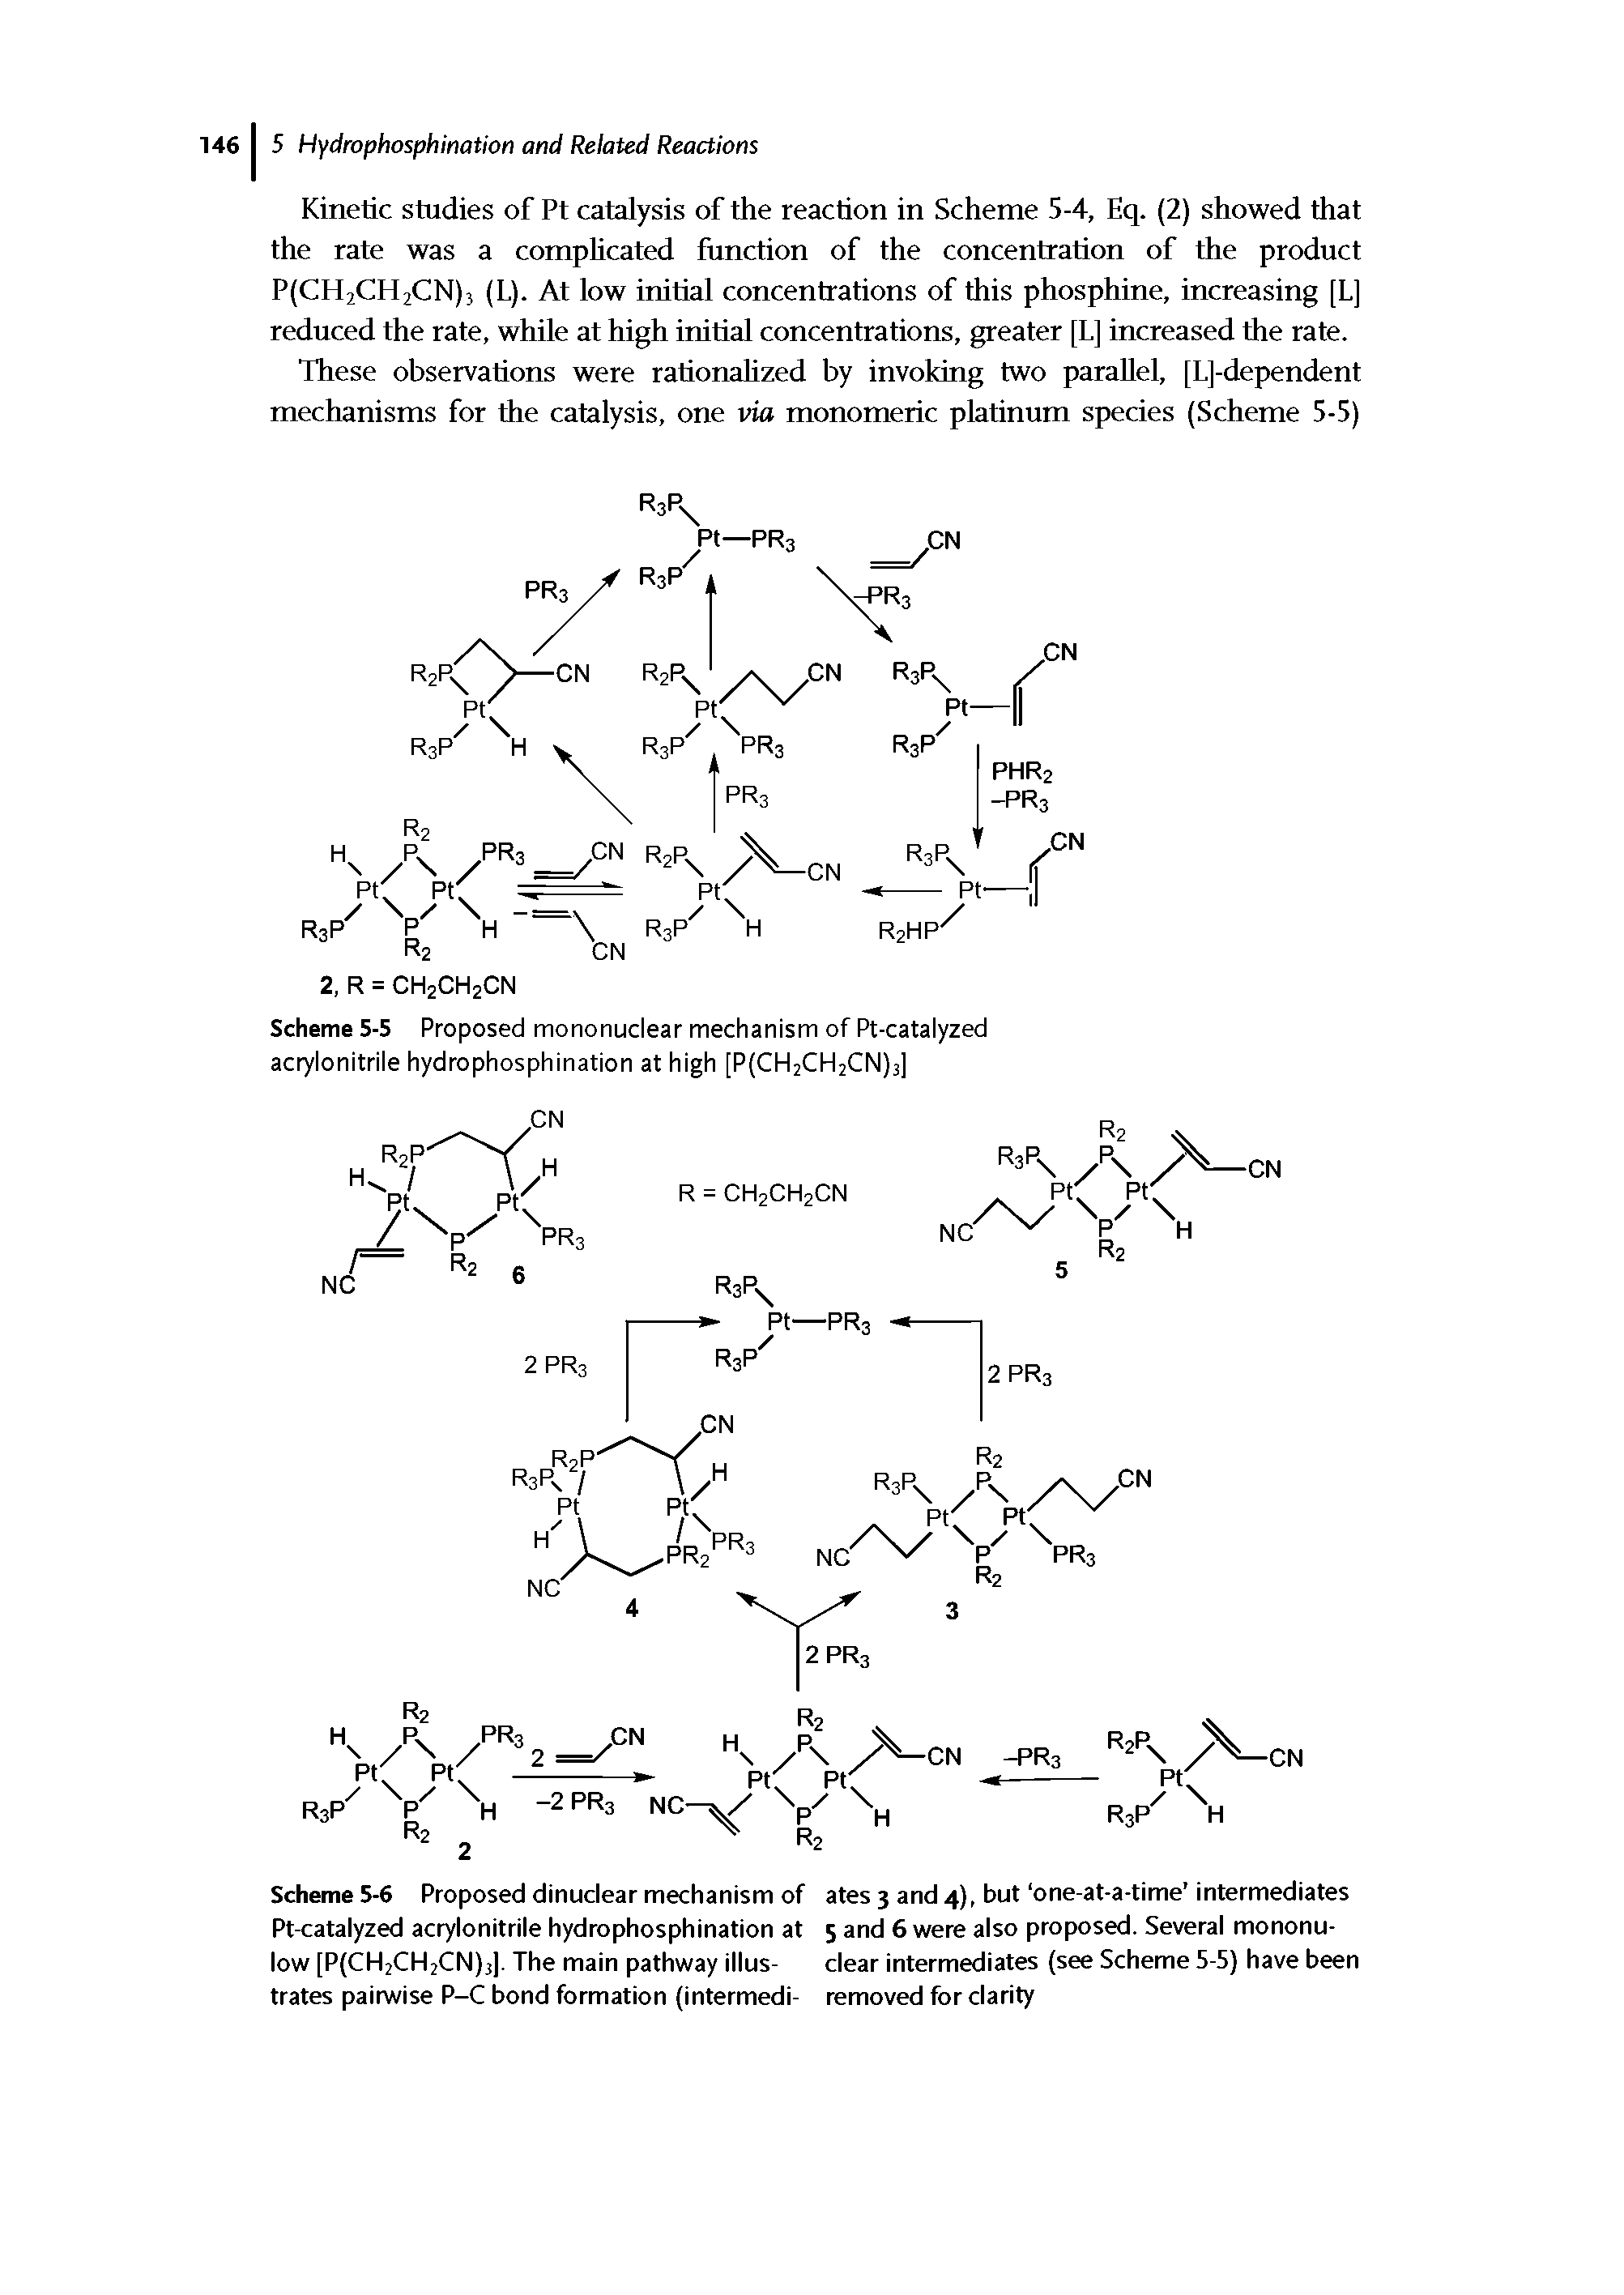 Scheme 5-6 Proposed dinuclear mechanism of ates 3 and 4), but one-at-a-time intermediates Pt-catalyzed acrylonitrile hydrophosphination at 5 and 6 were also proposed. Several mononu-low [P(CH2CH2CN)3. The main pathway illus- clear intermediates (see Scheme 5-5) have been trates pairwise P-C bond formation (intermedi- removed for clarity...